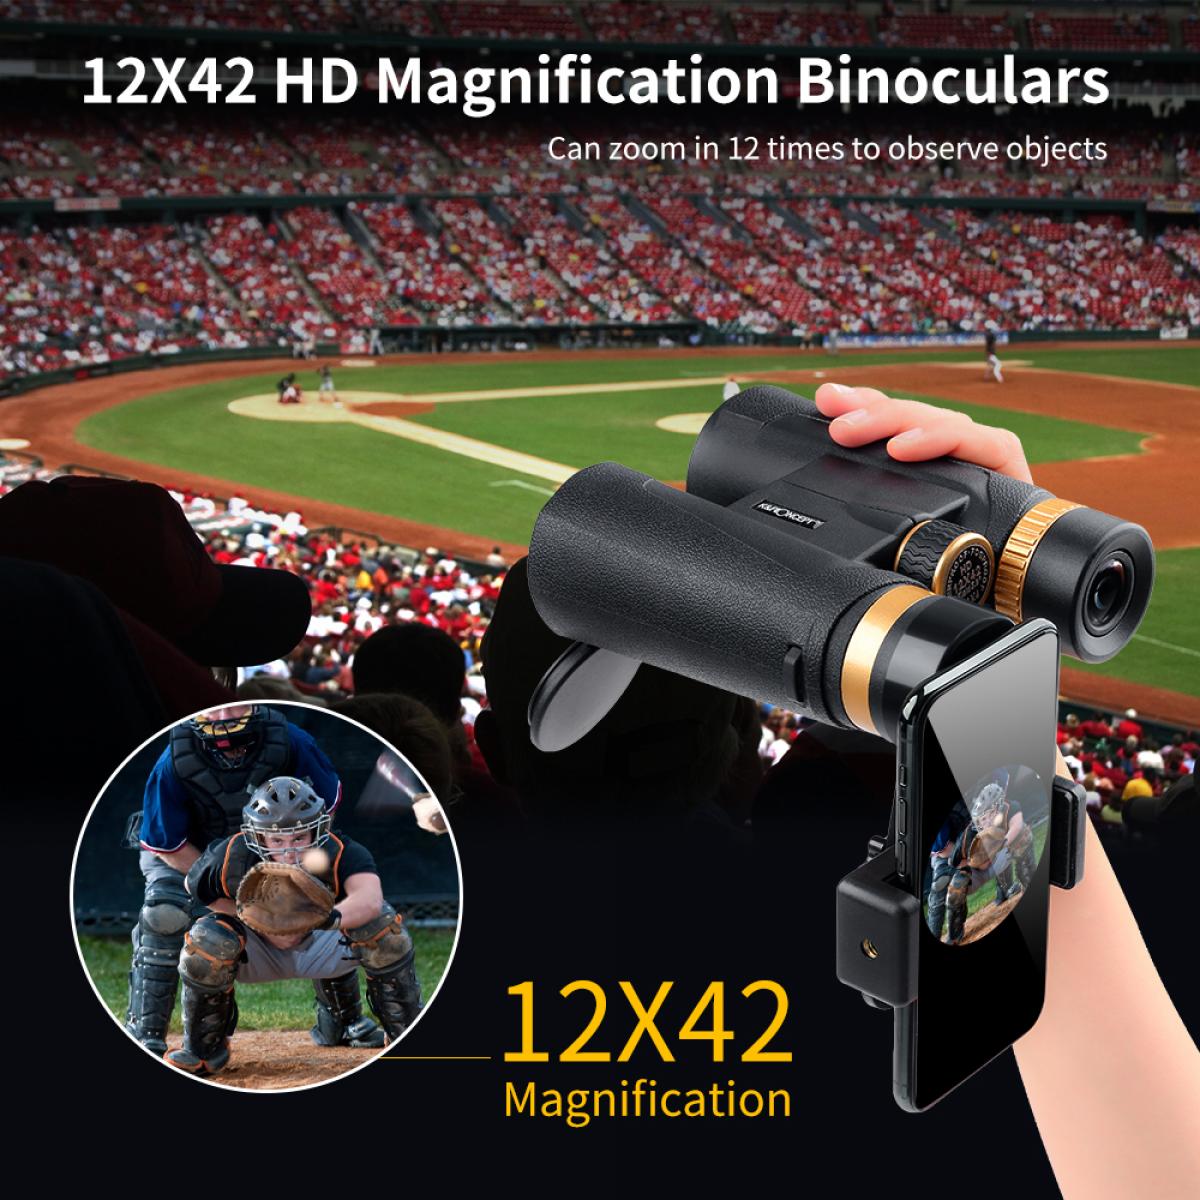 K&F Concept 12x42 Binoculars IP65 Waterproof Fogproof with 20mm Large View Eyepiece and Smartphone Holder for Phone Viewing